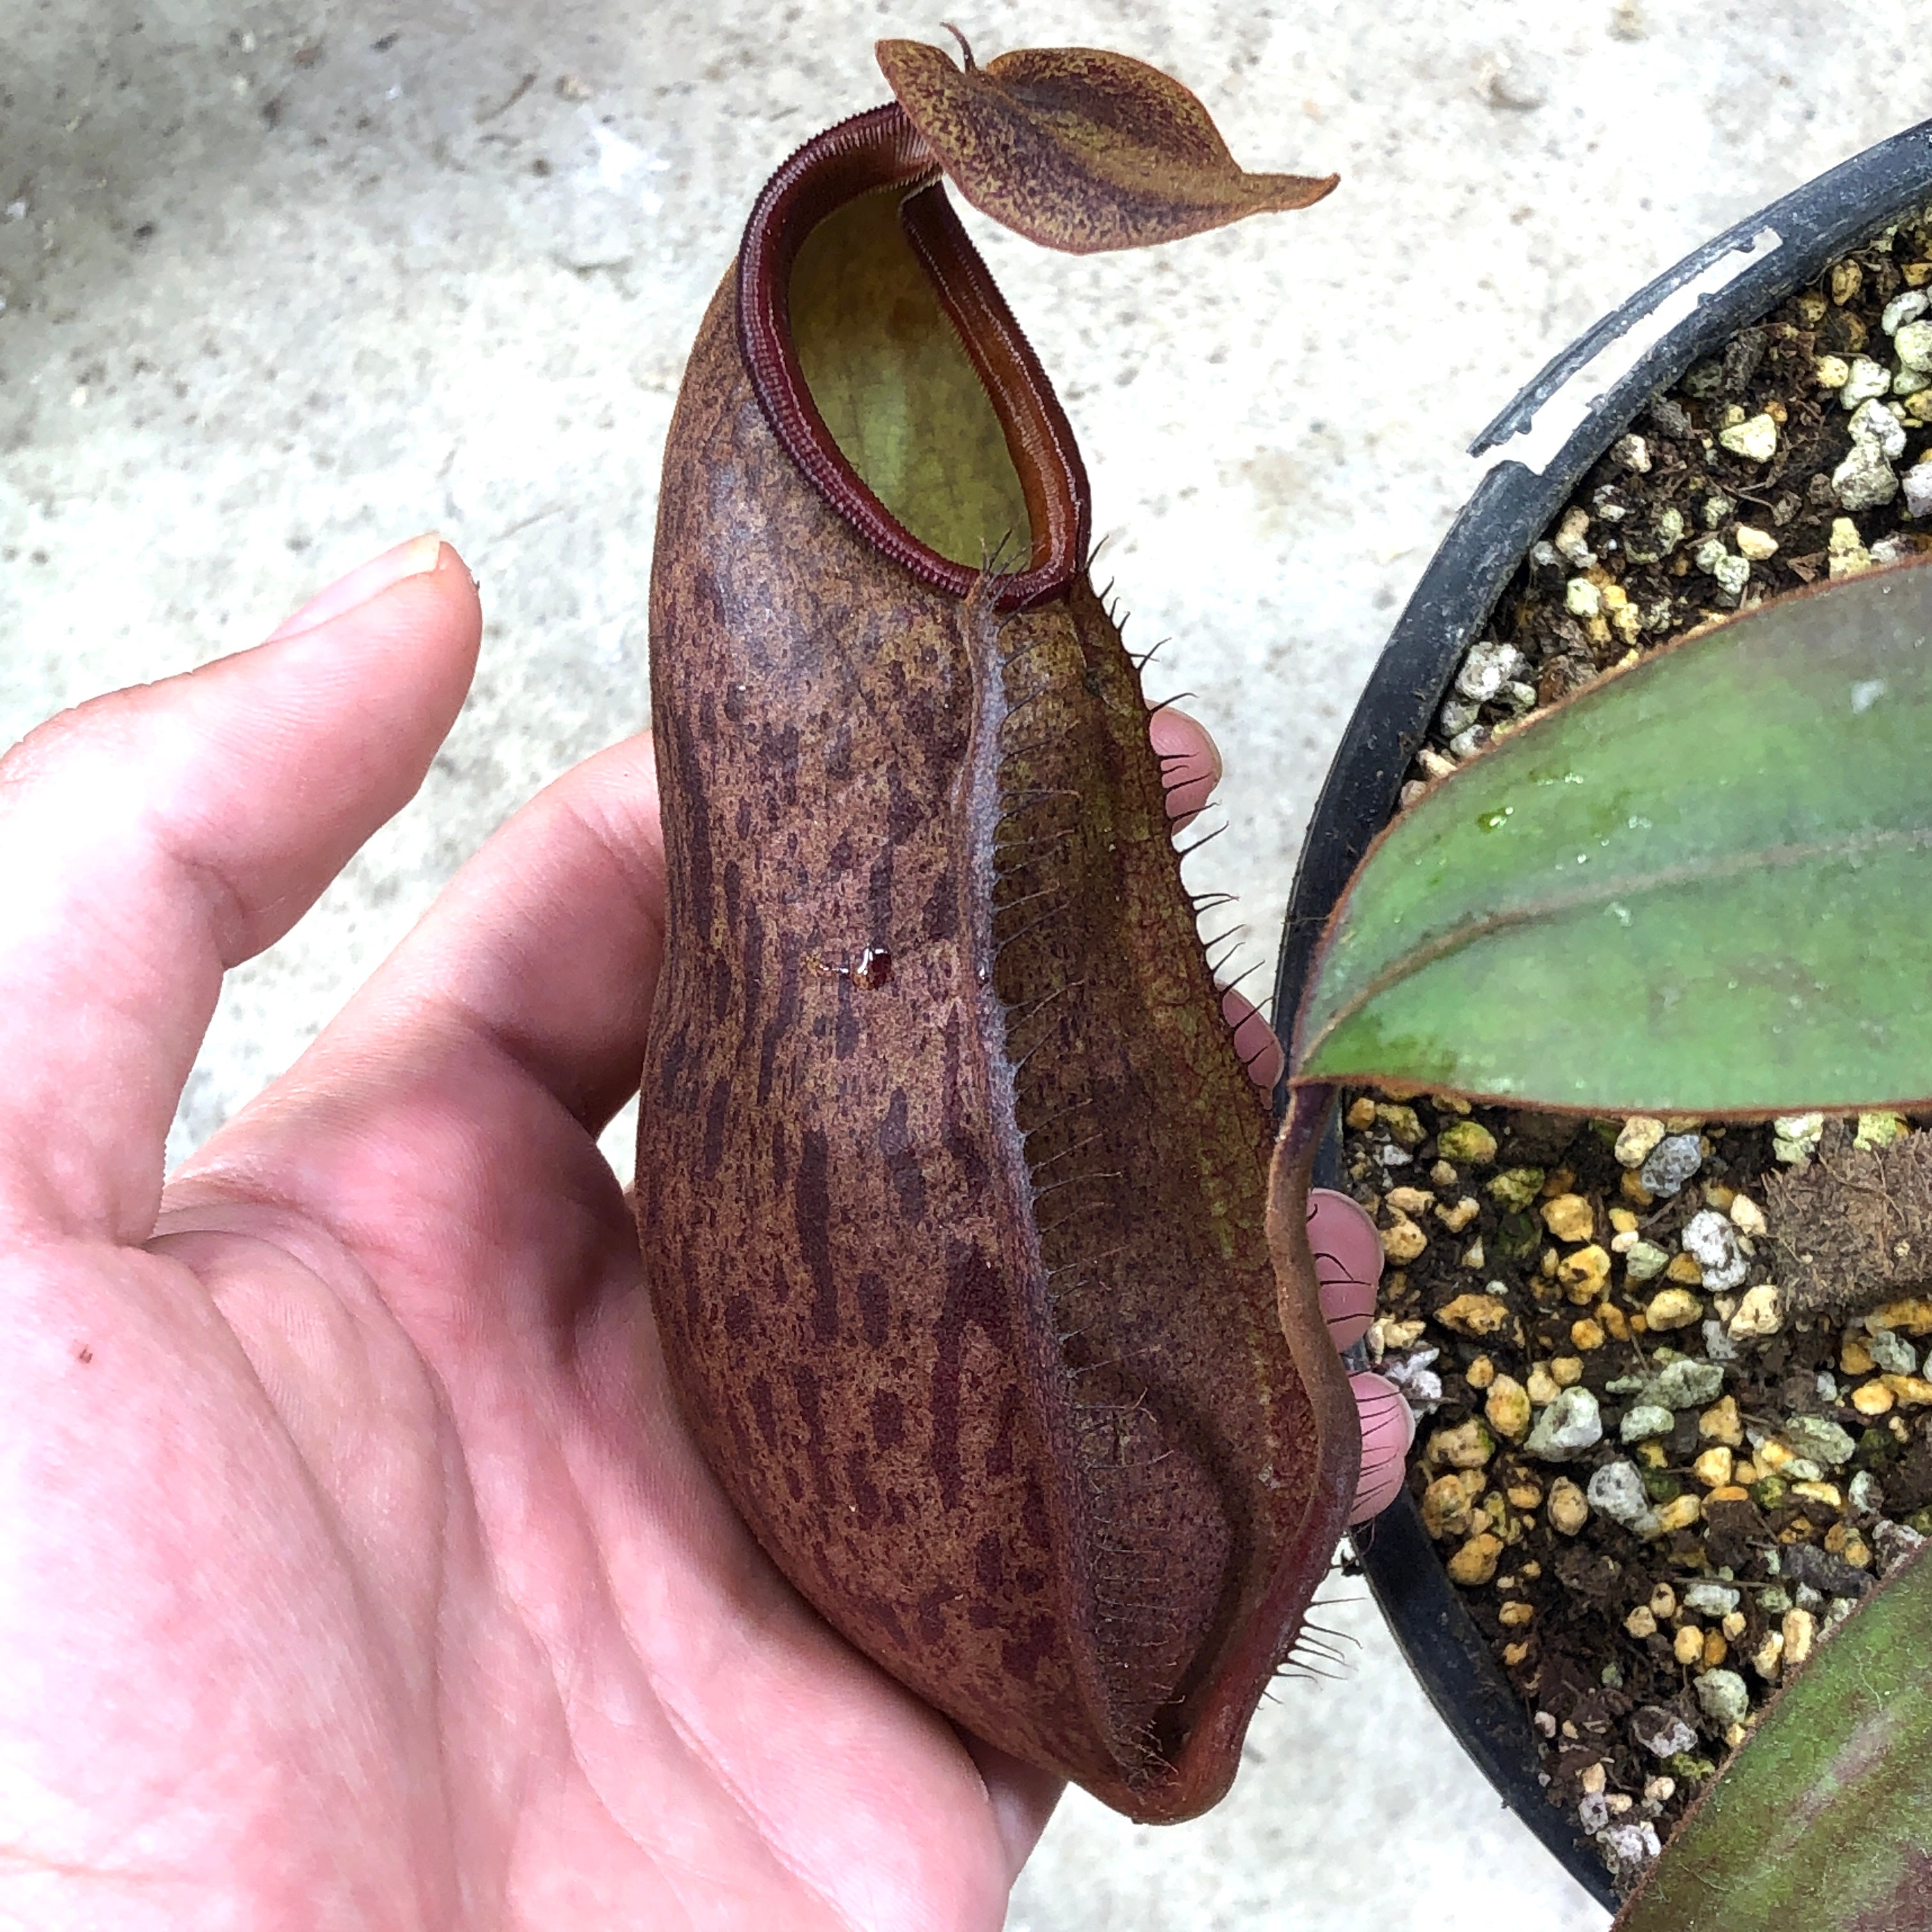 Nepenthes palawanensis x philippinensis